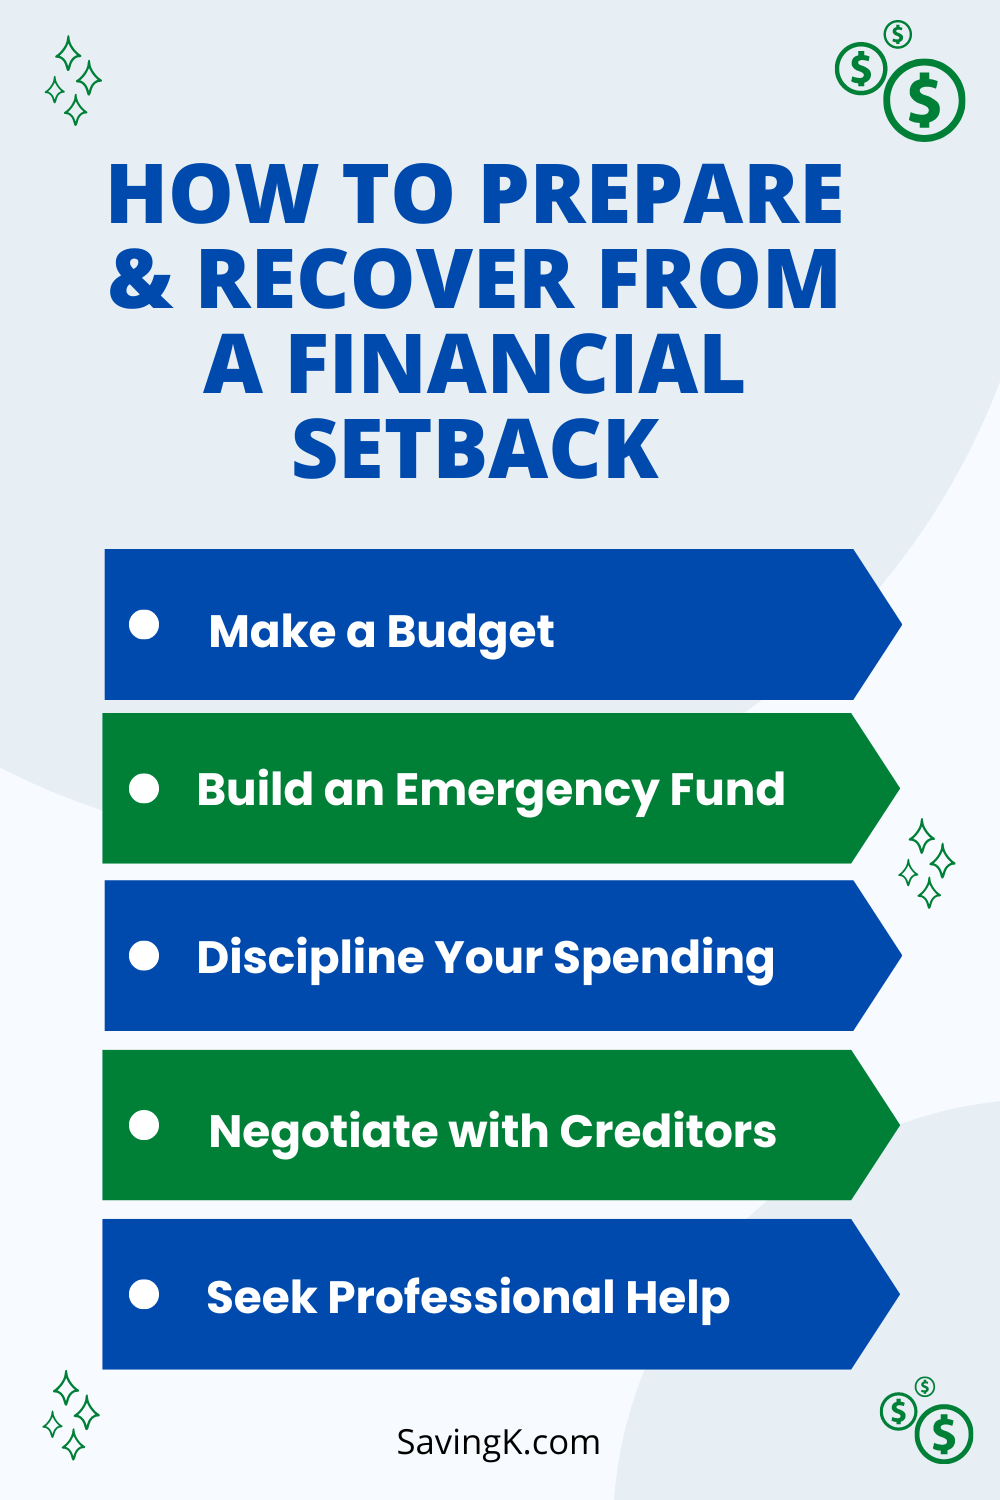 5 Tips to Prepare and Recover from a Financial Setback